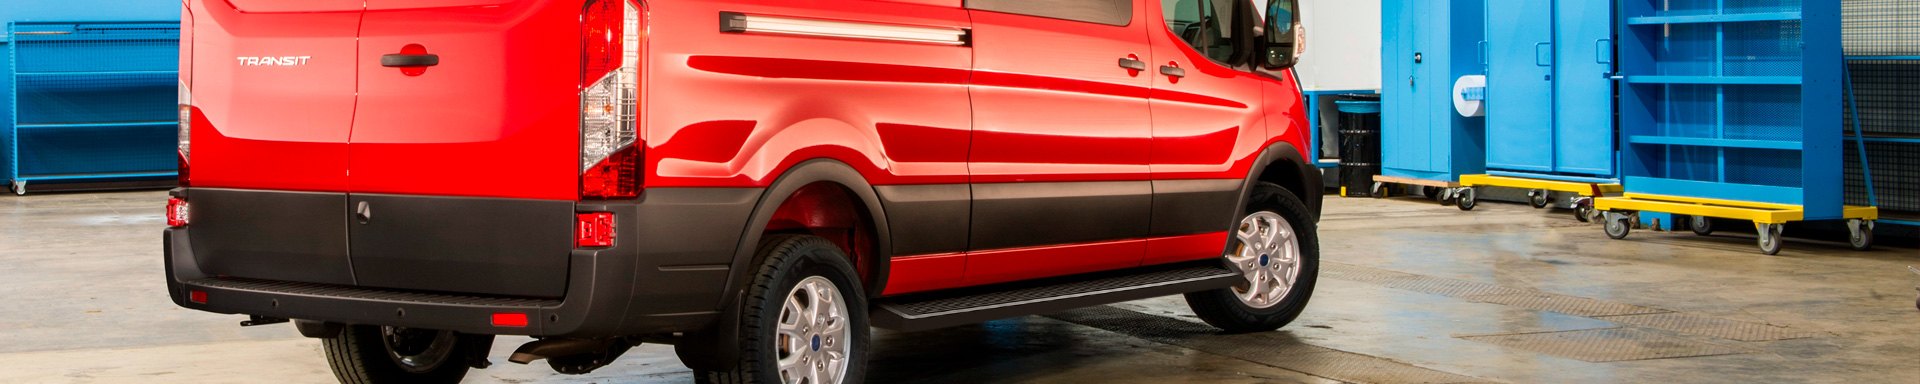 Provide Yourself With Solid Footing With New Line Of APG iStep Running Boards For 2021 Ford Transit